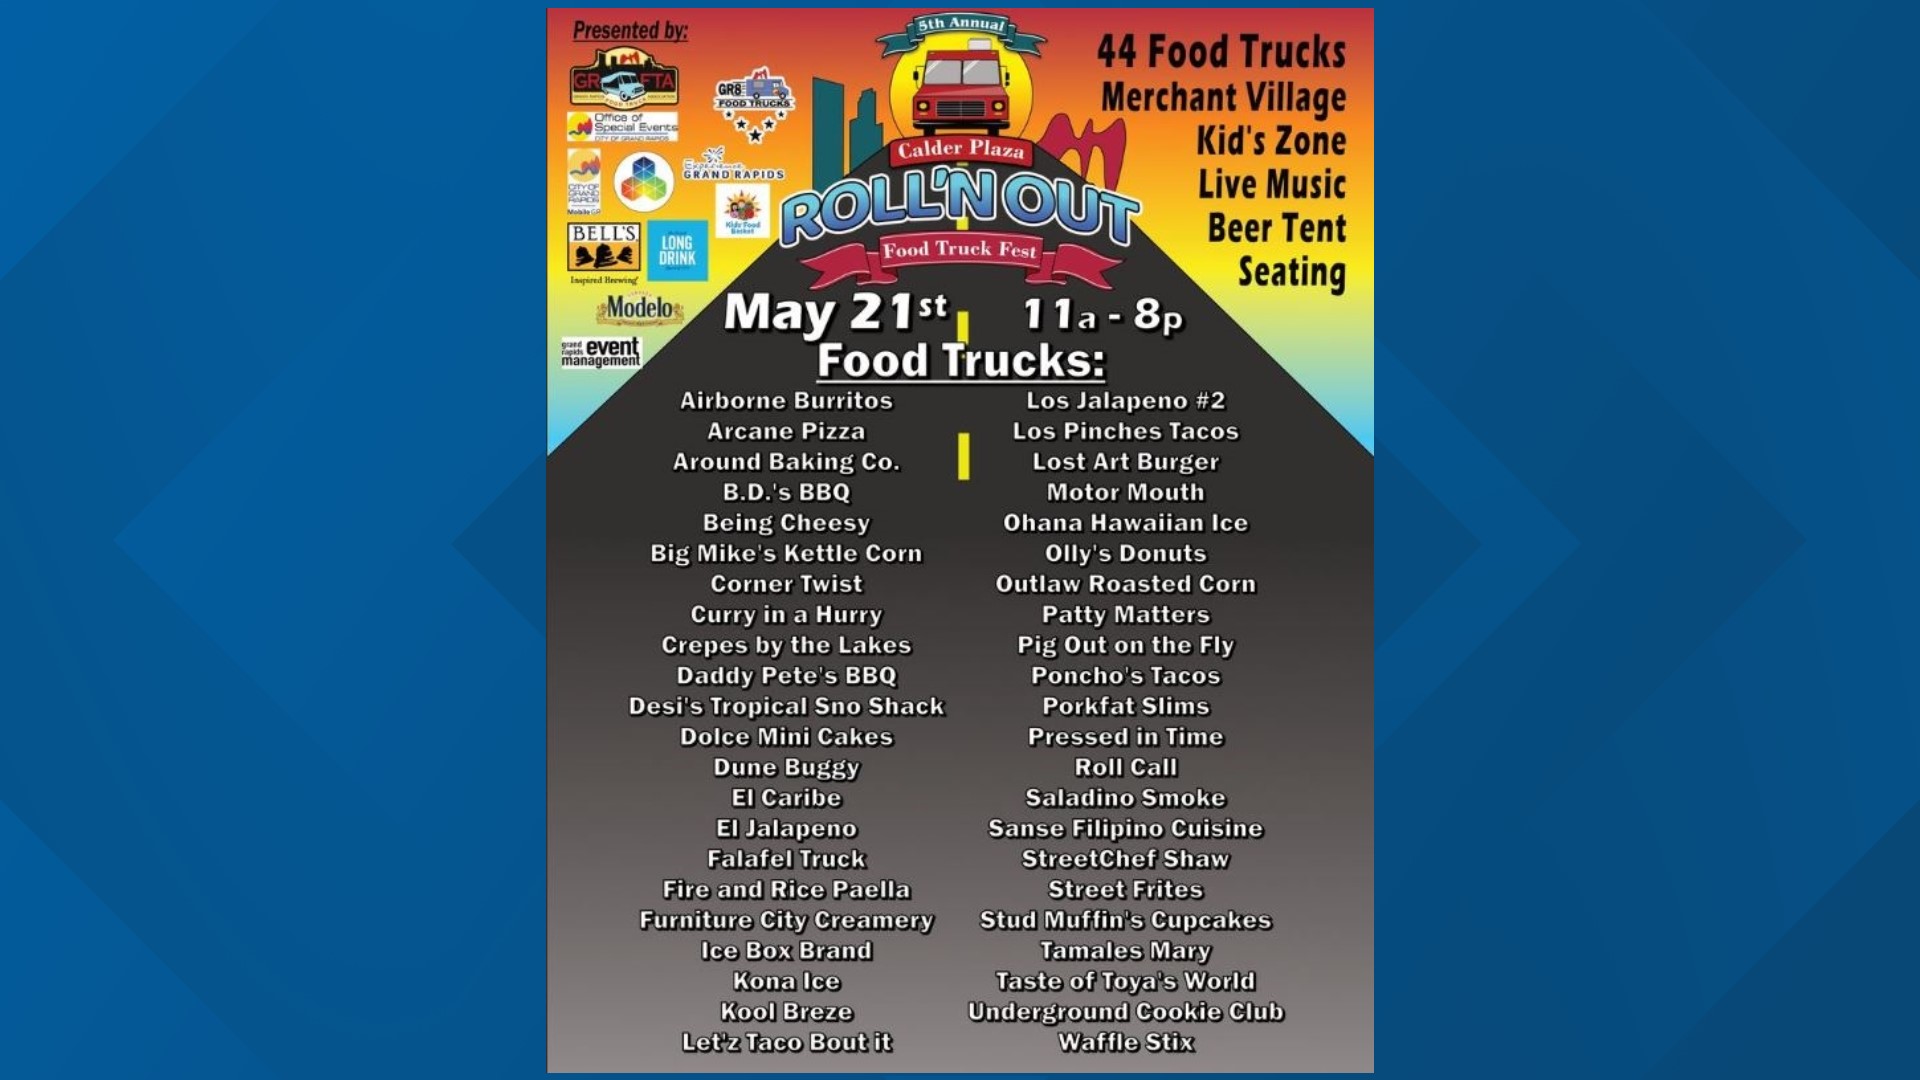 The Roll 'N Out Food Truck Festival celebrates the beginning of food truck season in West Michigan.